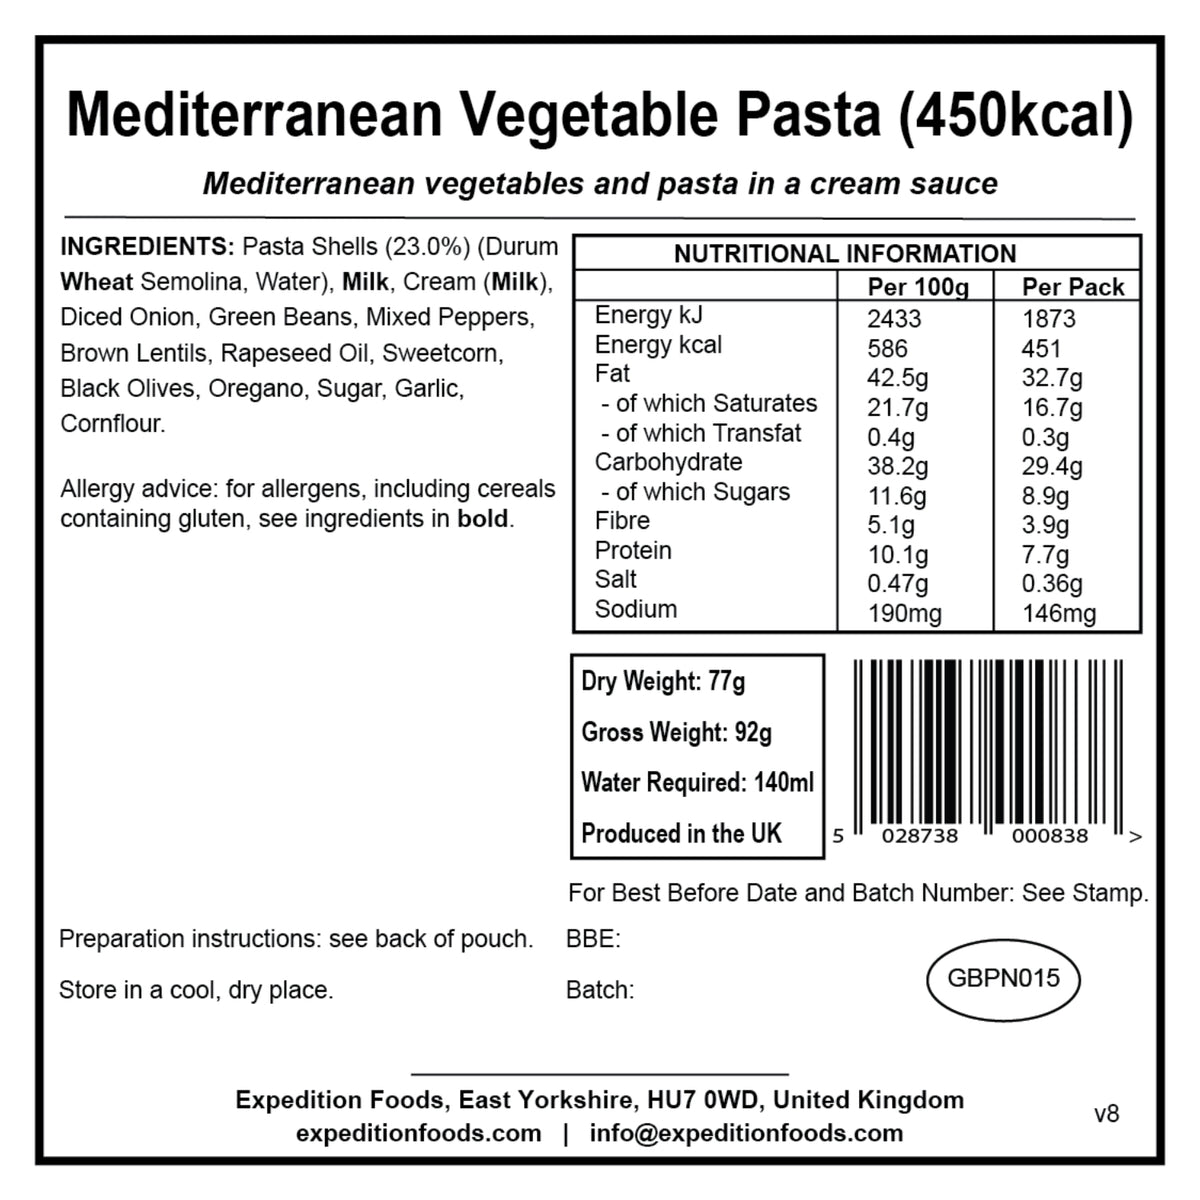 Expedition Foods Mediterranean Vegetable Pasta (450kcal)